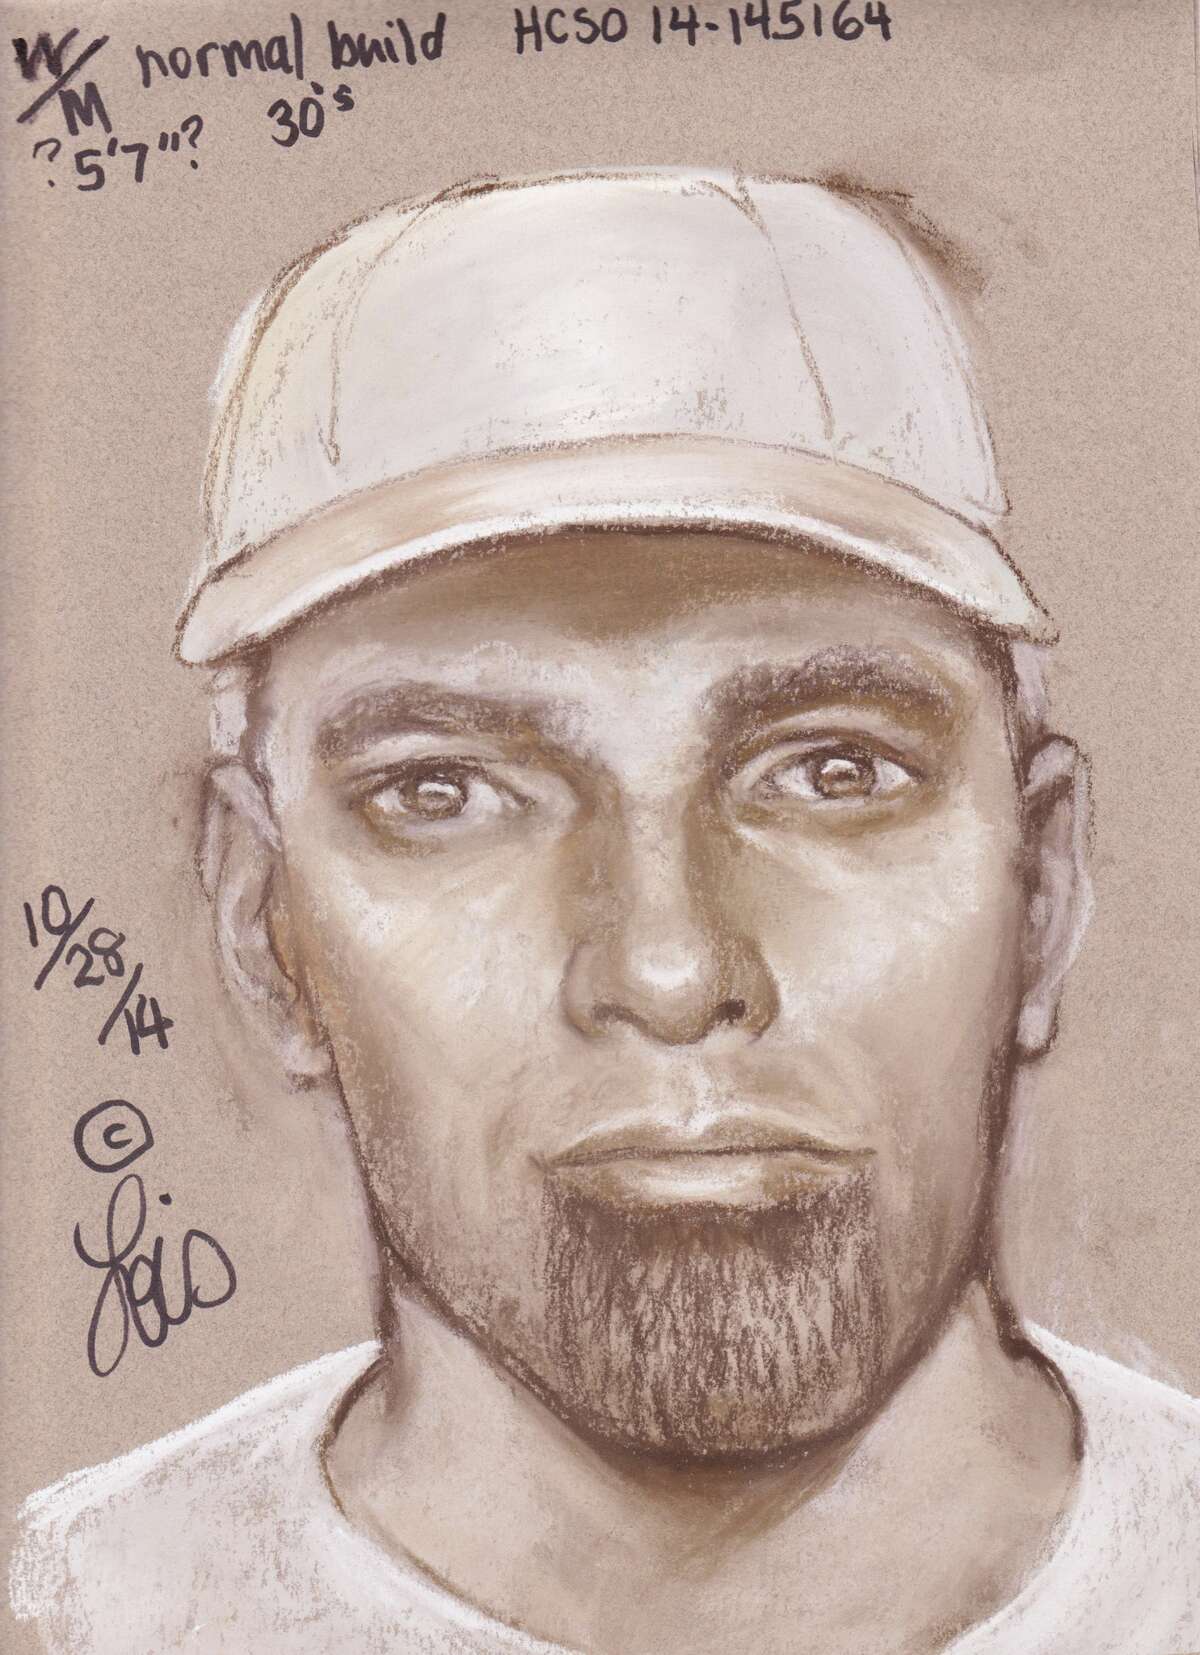 Authorities are searching for a man suspected in four sexual assaults on women in recent months in east Harris County.